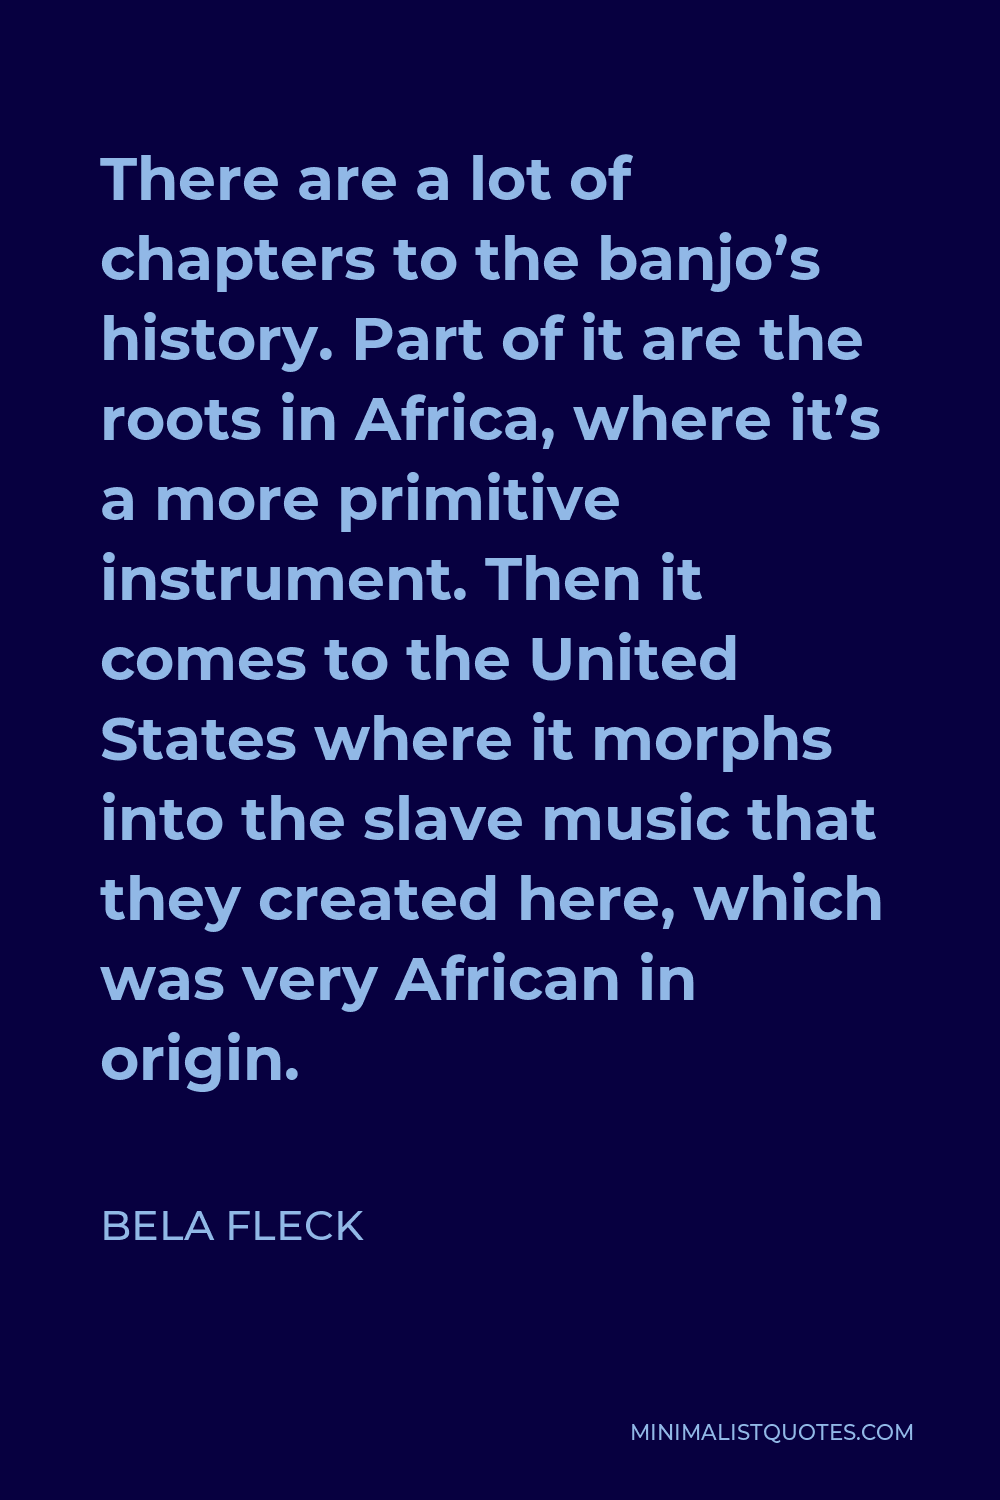 Bela Fleck Quote - There are a lot of chapters to the banjo’s history. Part of it are the roots in Africa, where it’s a more primitive instrument. Then it comes to the United States where it morphs into the slave music that they created here, which was very African in origin.